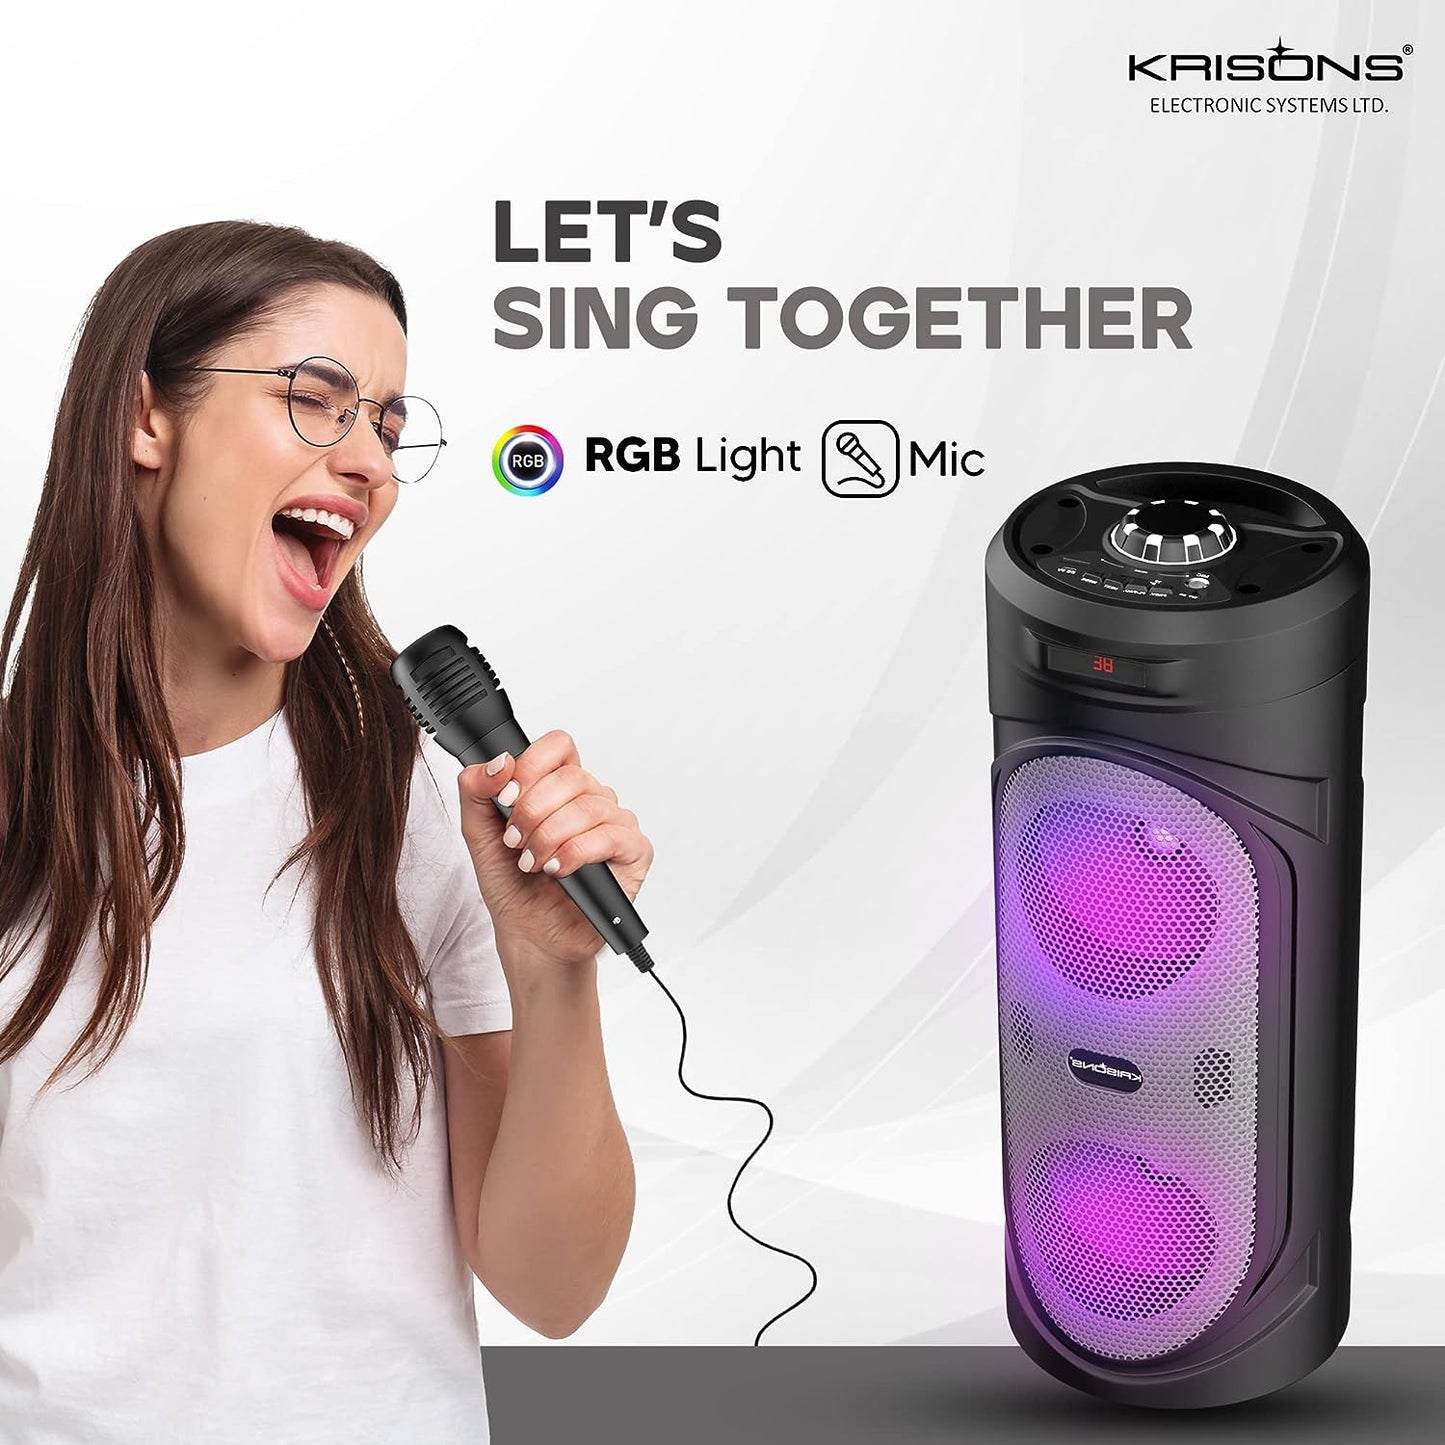 Krisons 4" SilverStar Double Woofer 40W Multi-Media Bluetooth Party Speaker with Wired Mic for Karaoke,Digital Display, RGB Lights, USB, SD Card and FM Radio